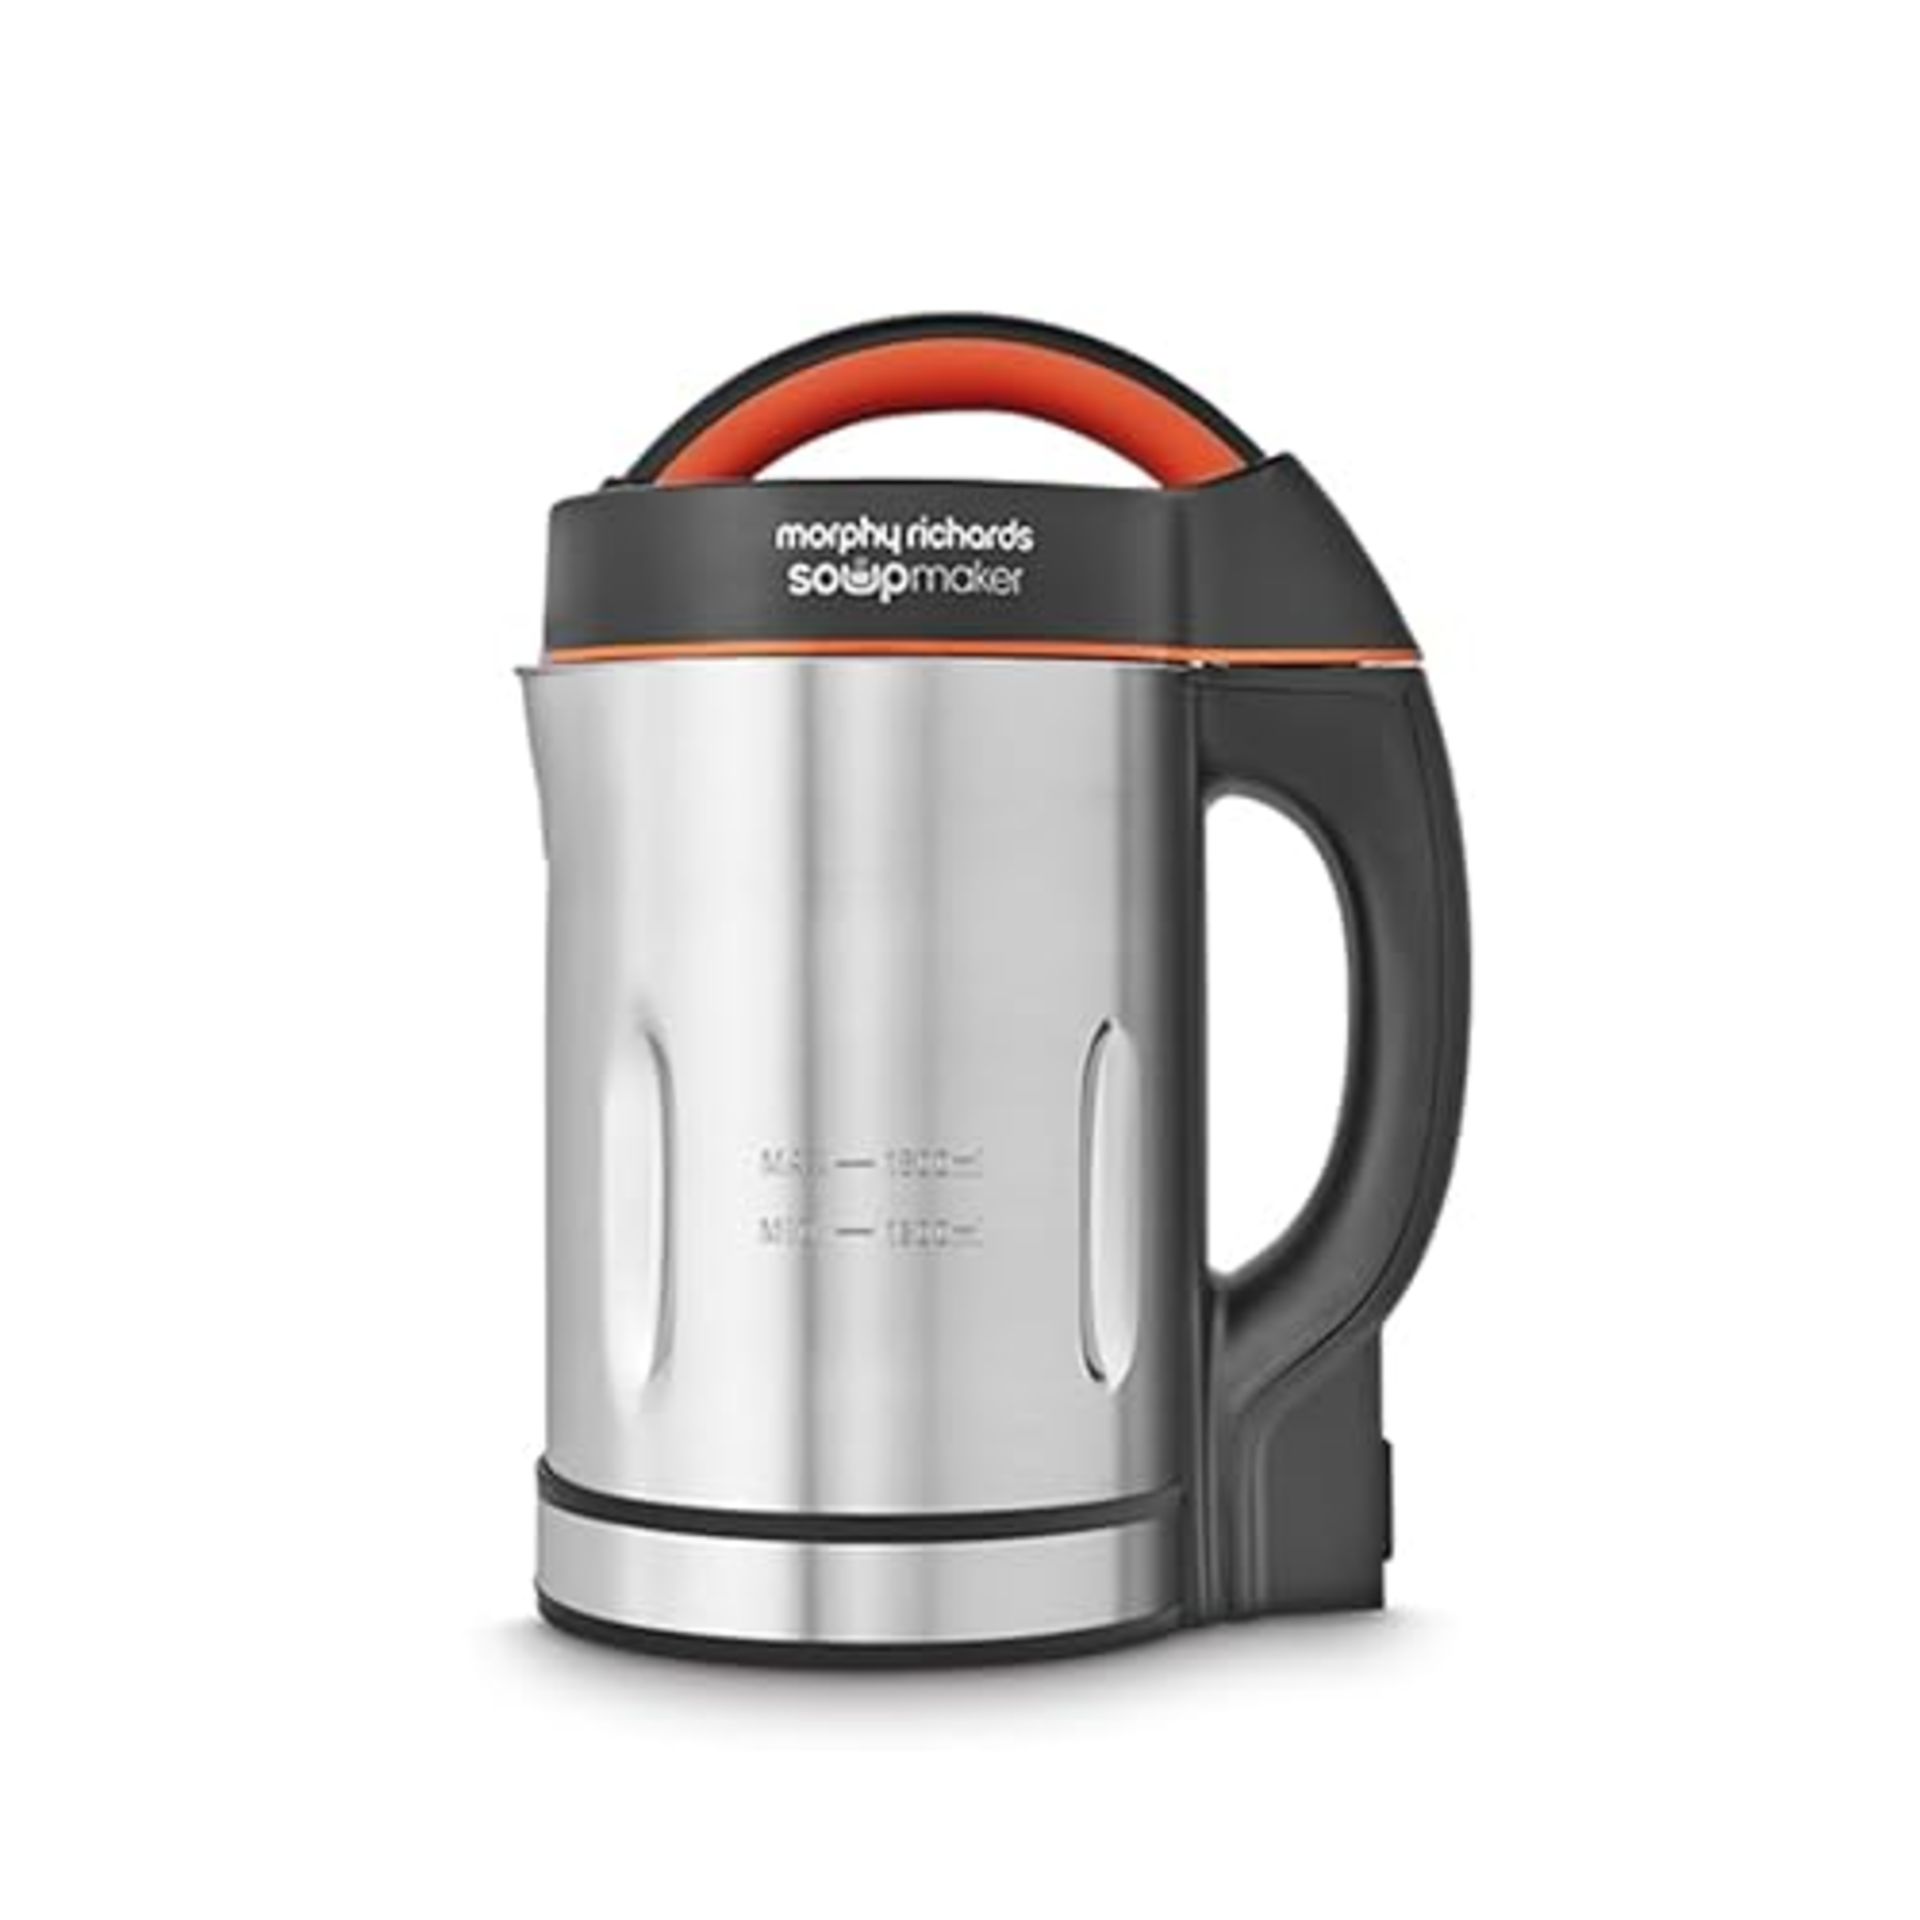 Morphy Richards 48822 Soup maker, Stainless Steel, 1000 W, 1.6 liters